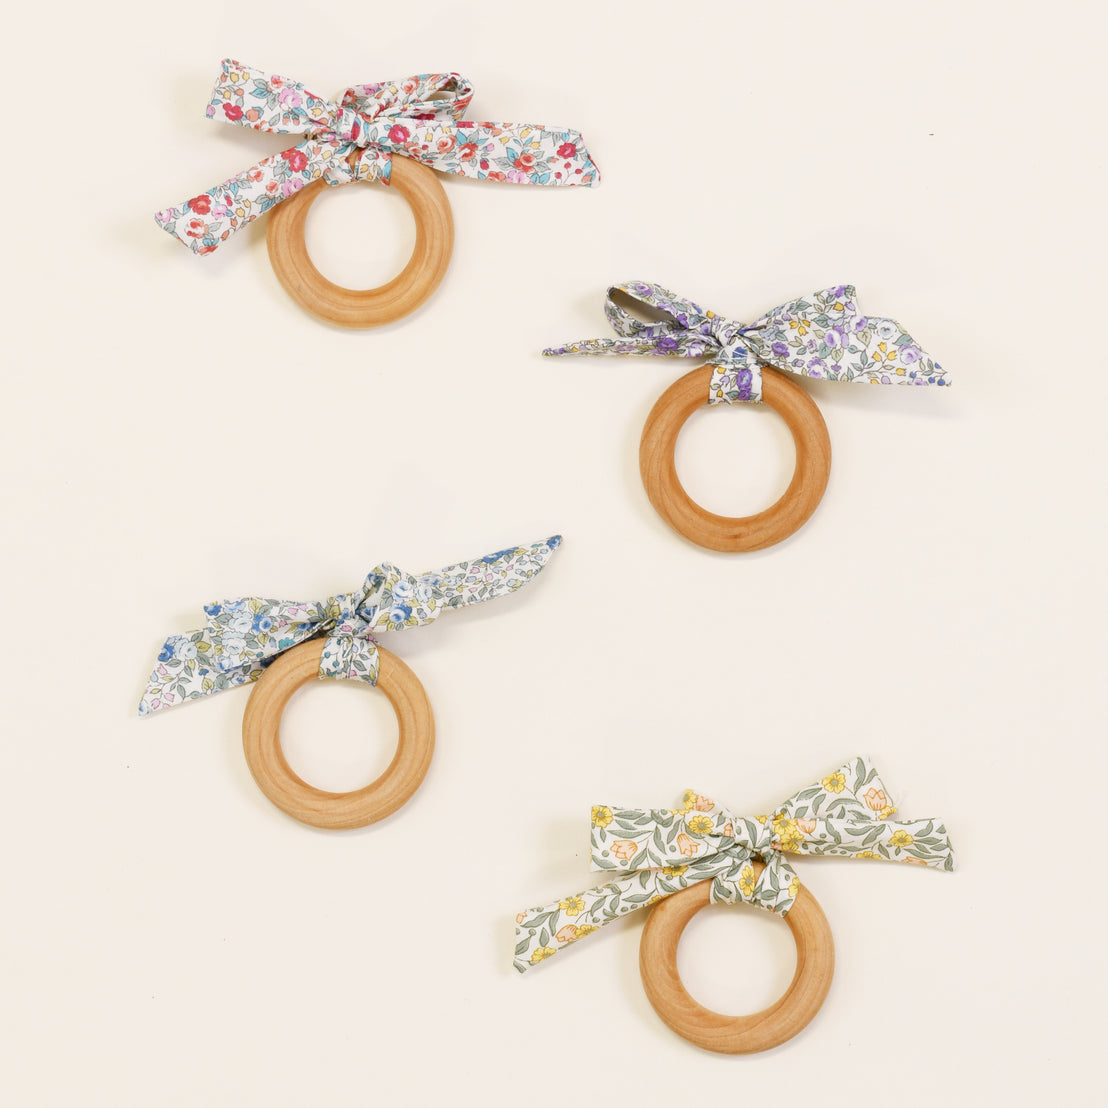 Four Petite Fleur Wooden Teether Rings, each adorned with a boutique fabric bow in different floral patterns on a plain, light background.